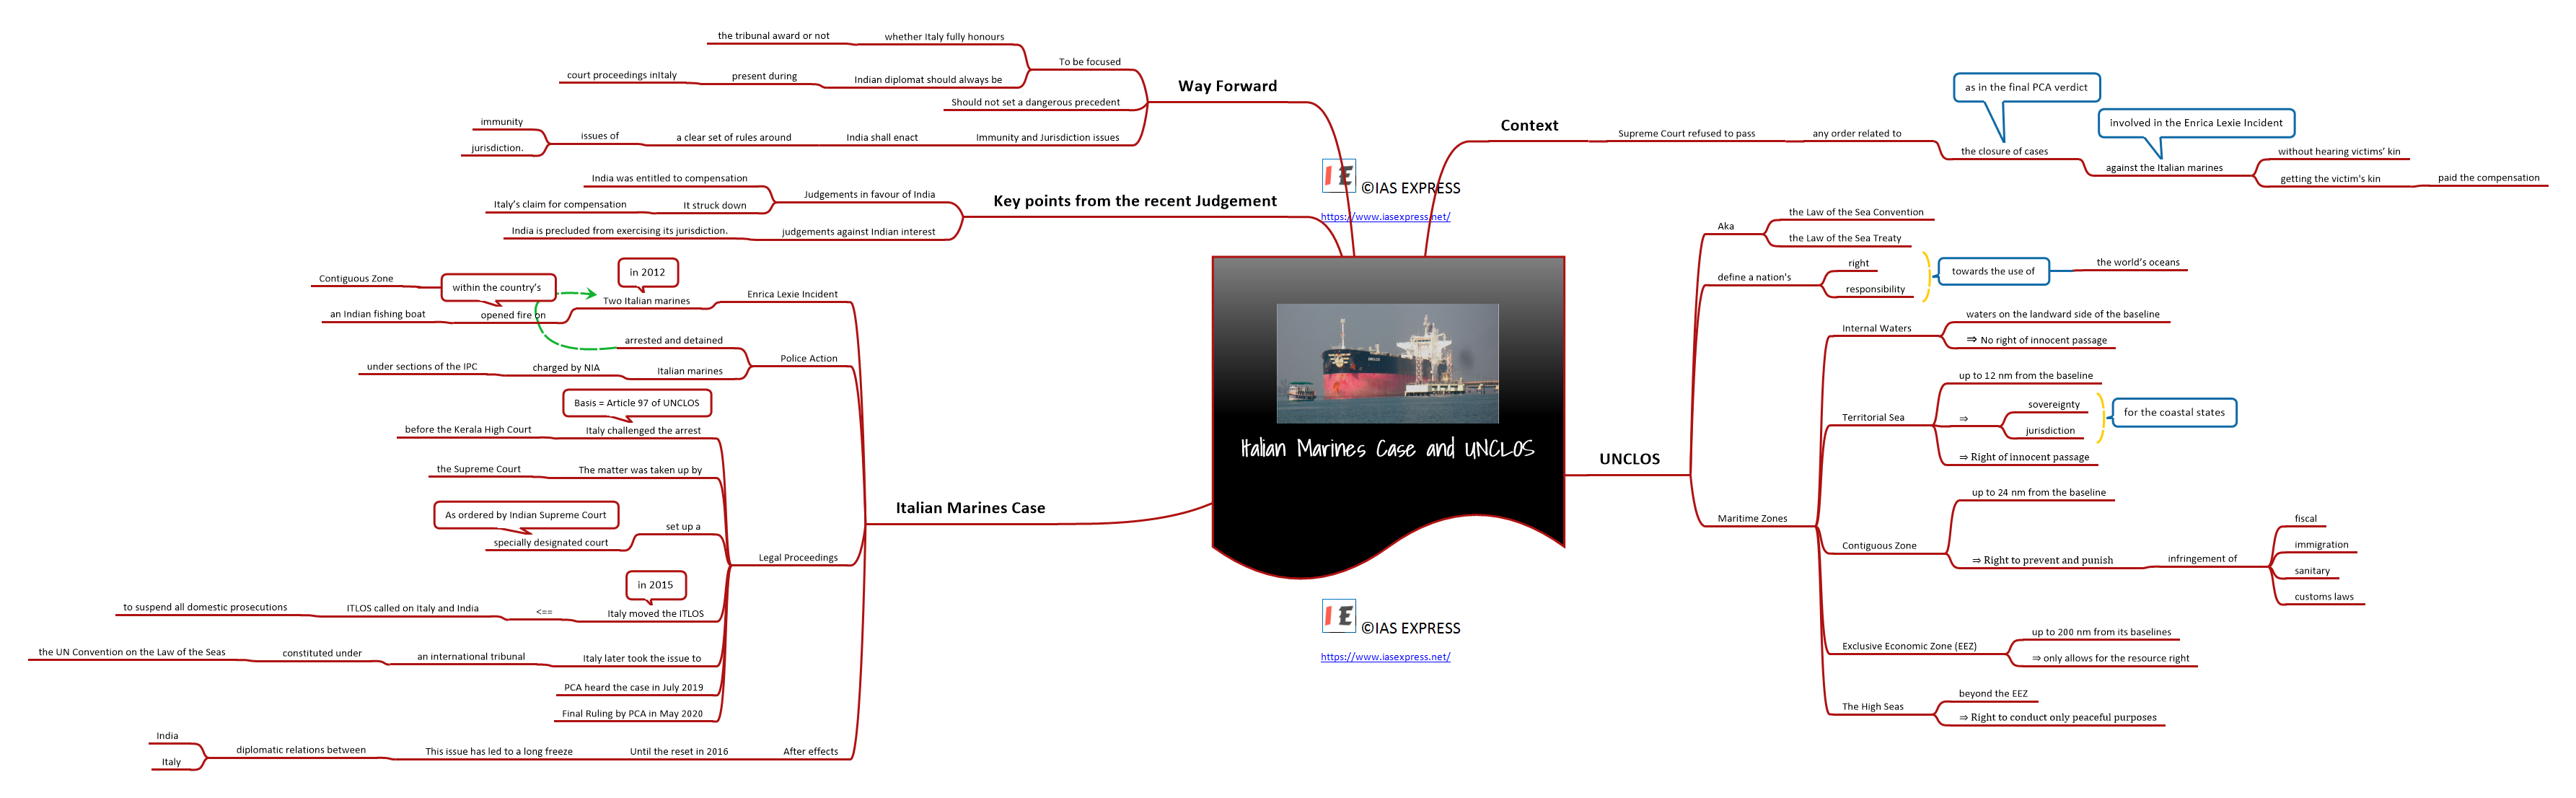 Mind map of Italian Marines Case and UNCLOS